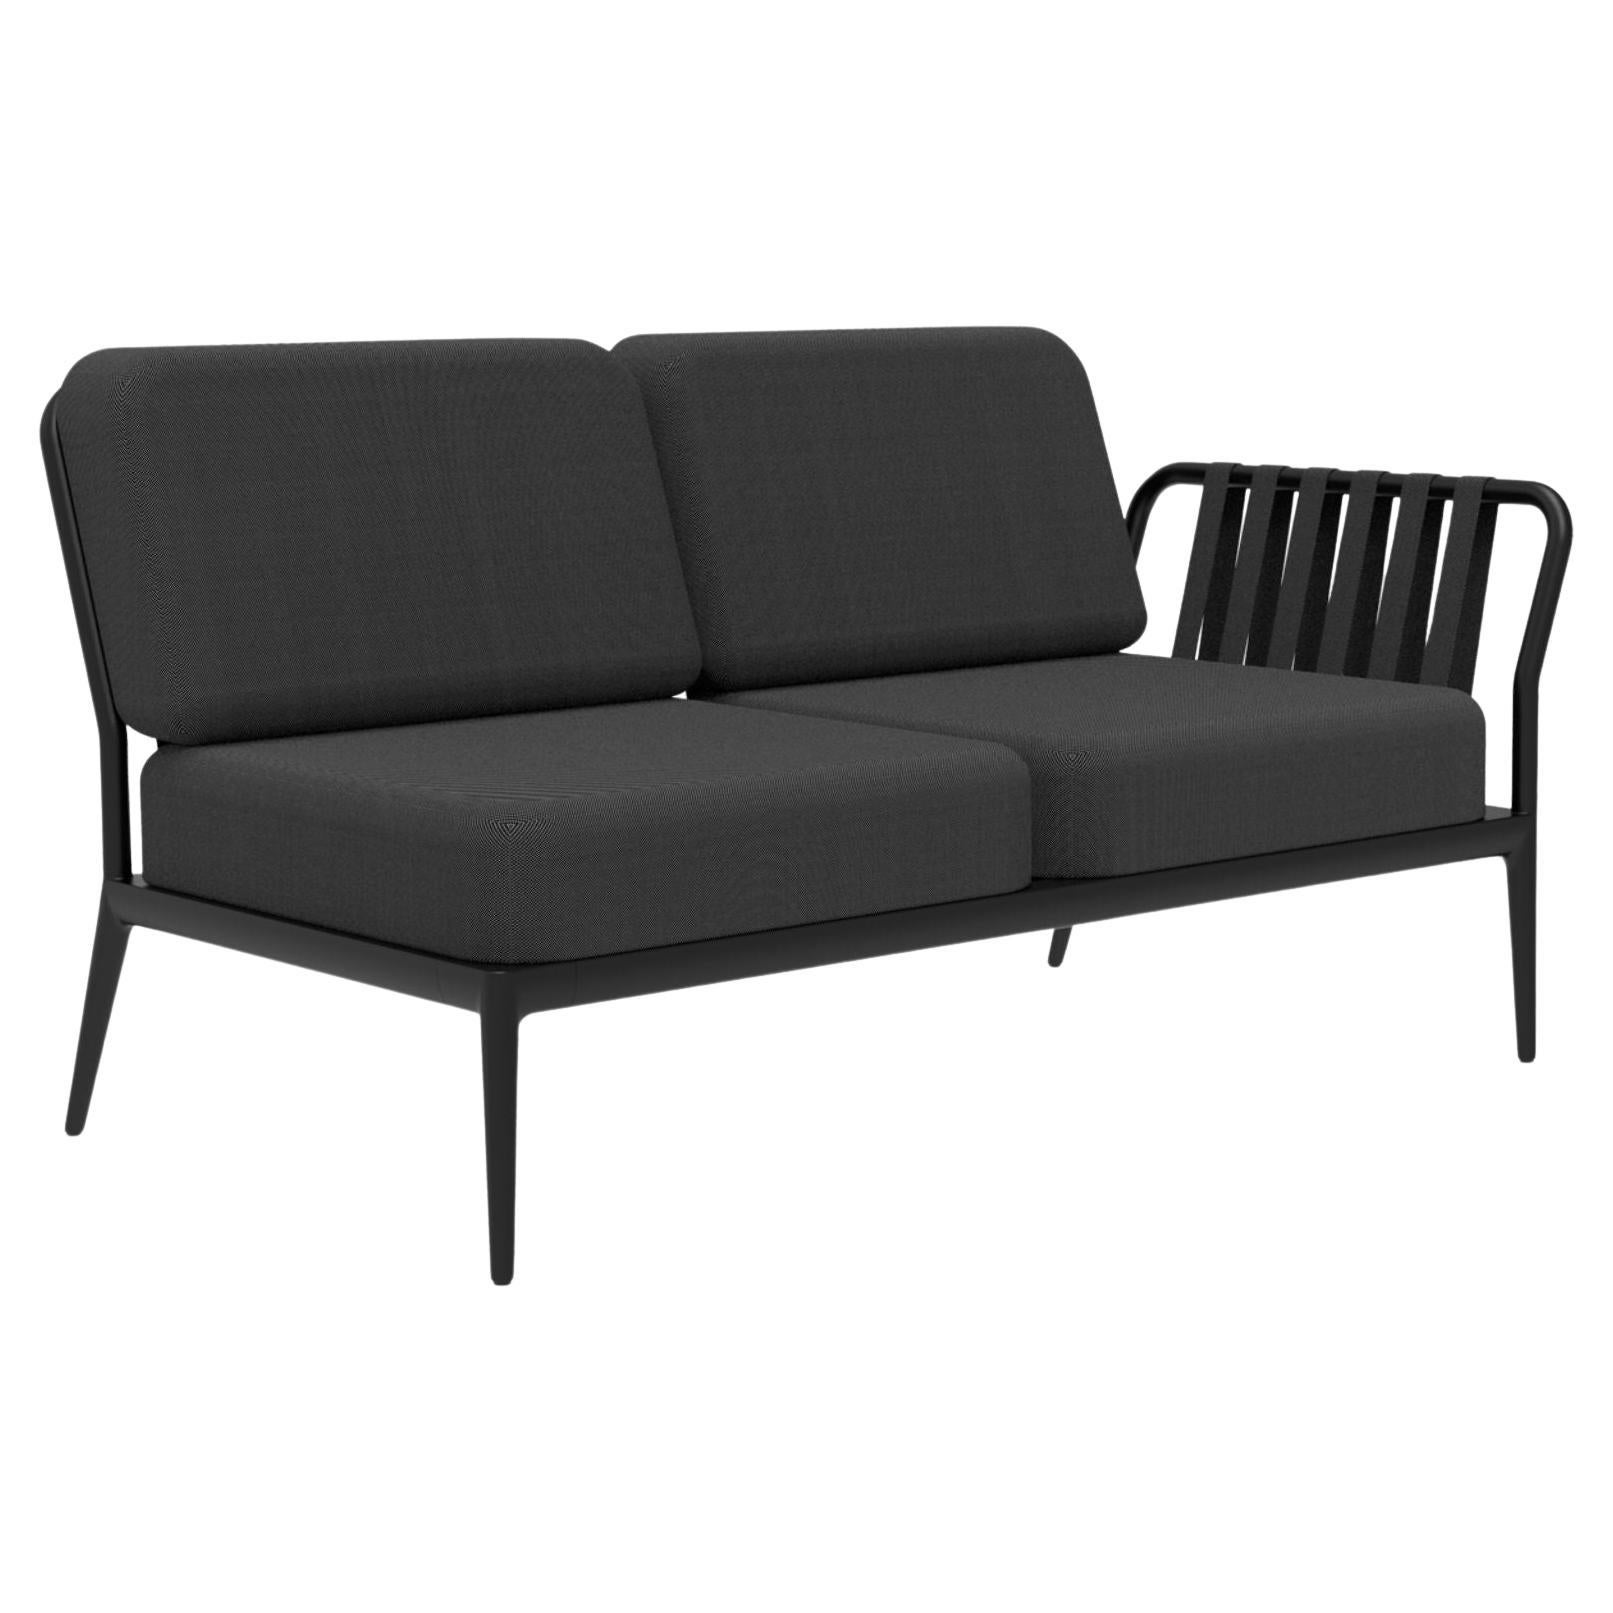 Ribbons Black Double Left Modular Sofa by Mowee For Sale